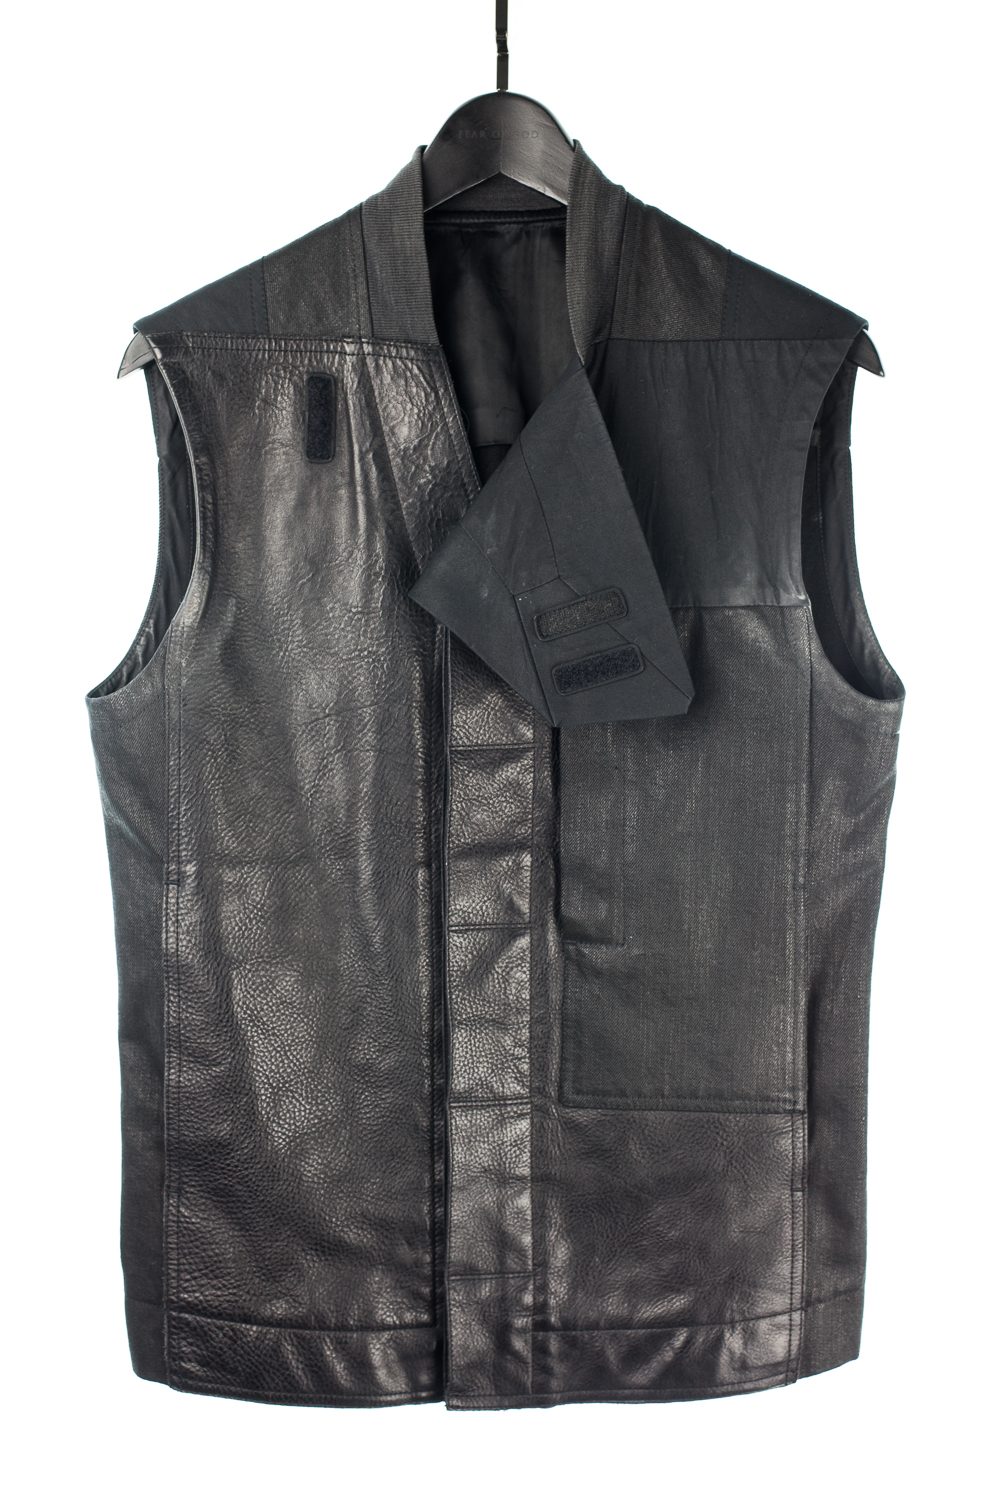 SS13 “Island” Leather/Cotton Fitted Jungle Vest